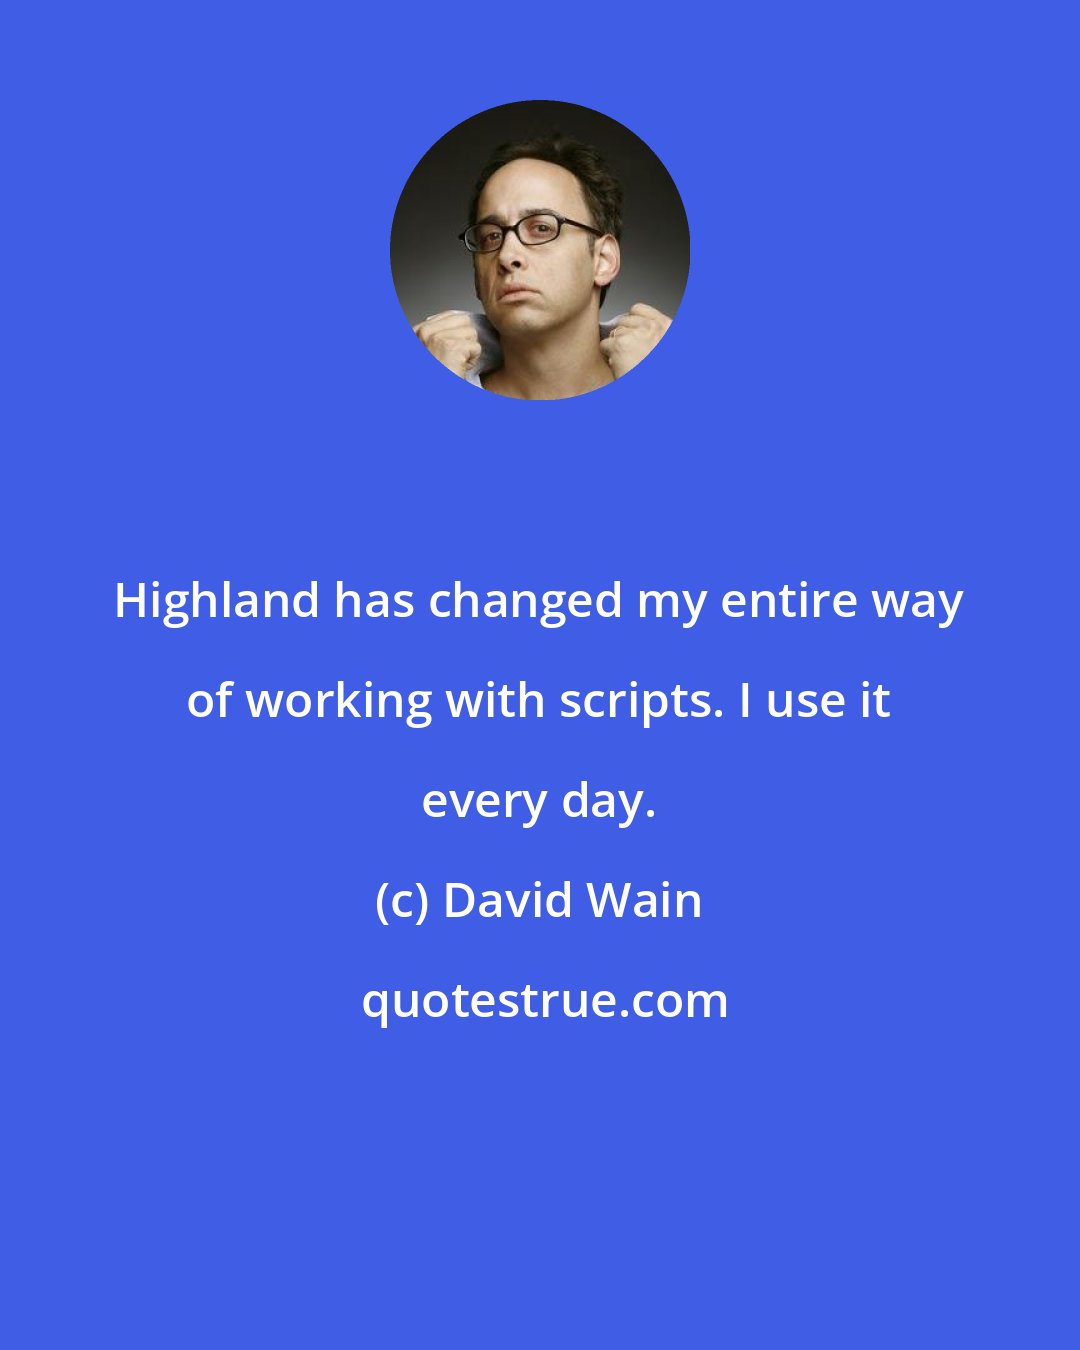 David Wain: Highland has changed my entire way of working with scripts. I use it every day.